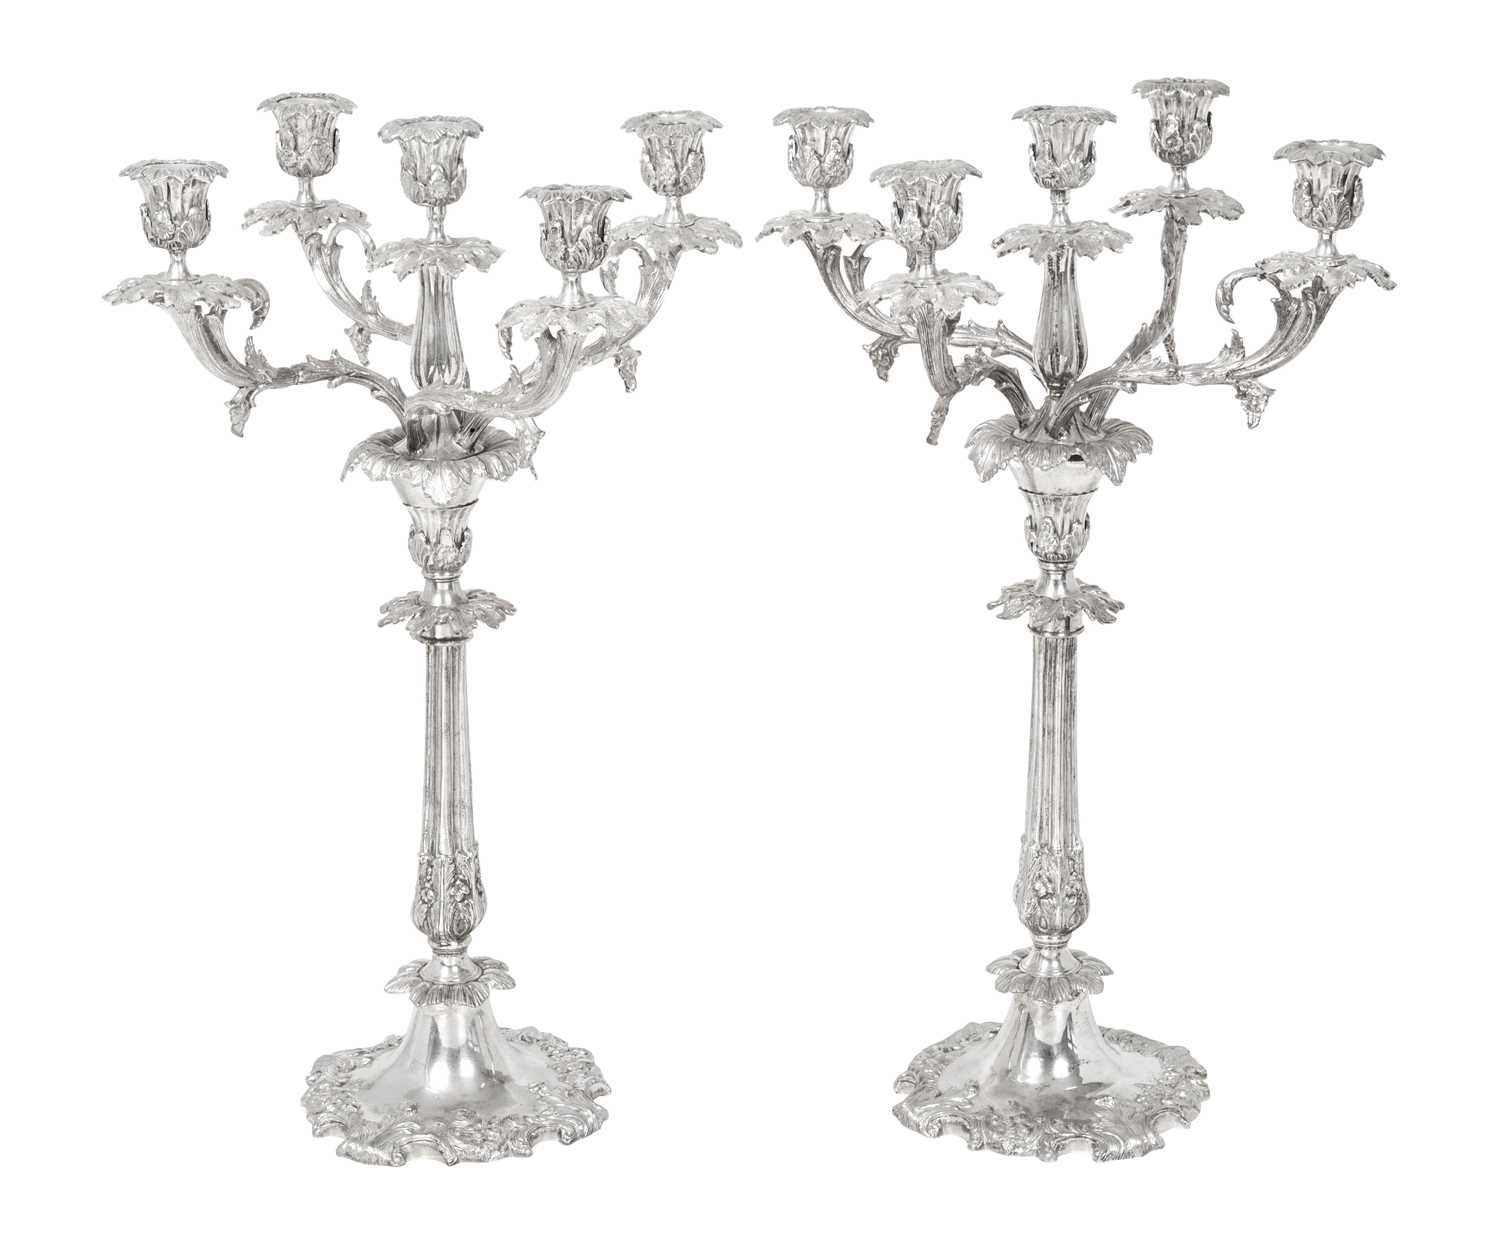 A Pair of American Silver Plate Five-Light Candelabra, by Van Bergh Silver Plate Co., Rochester, Ne